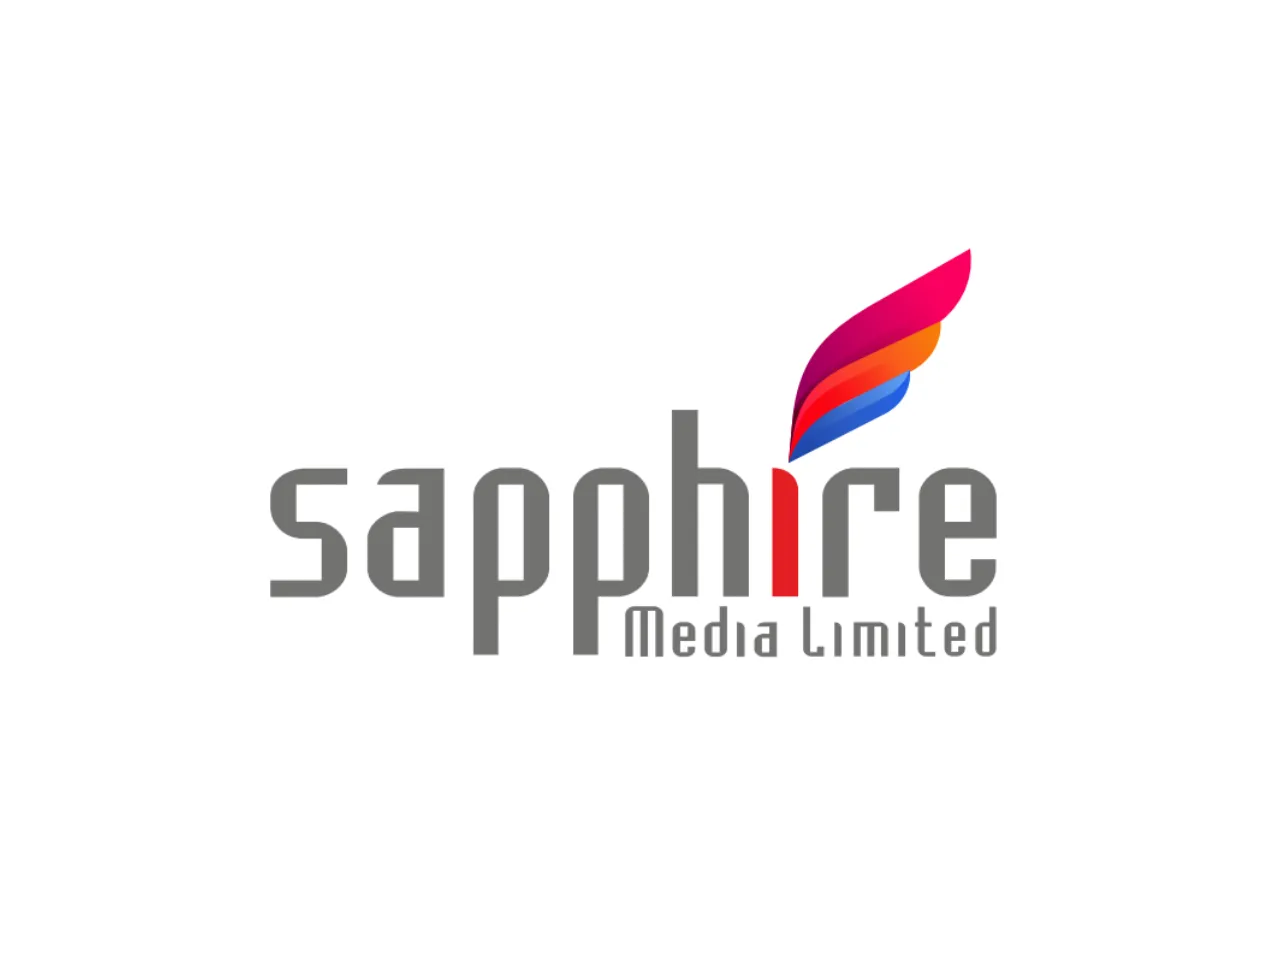 NCLT approves resolution plan of Sapphire Media Limited for Big 92.7 FM